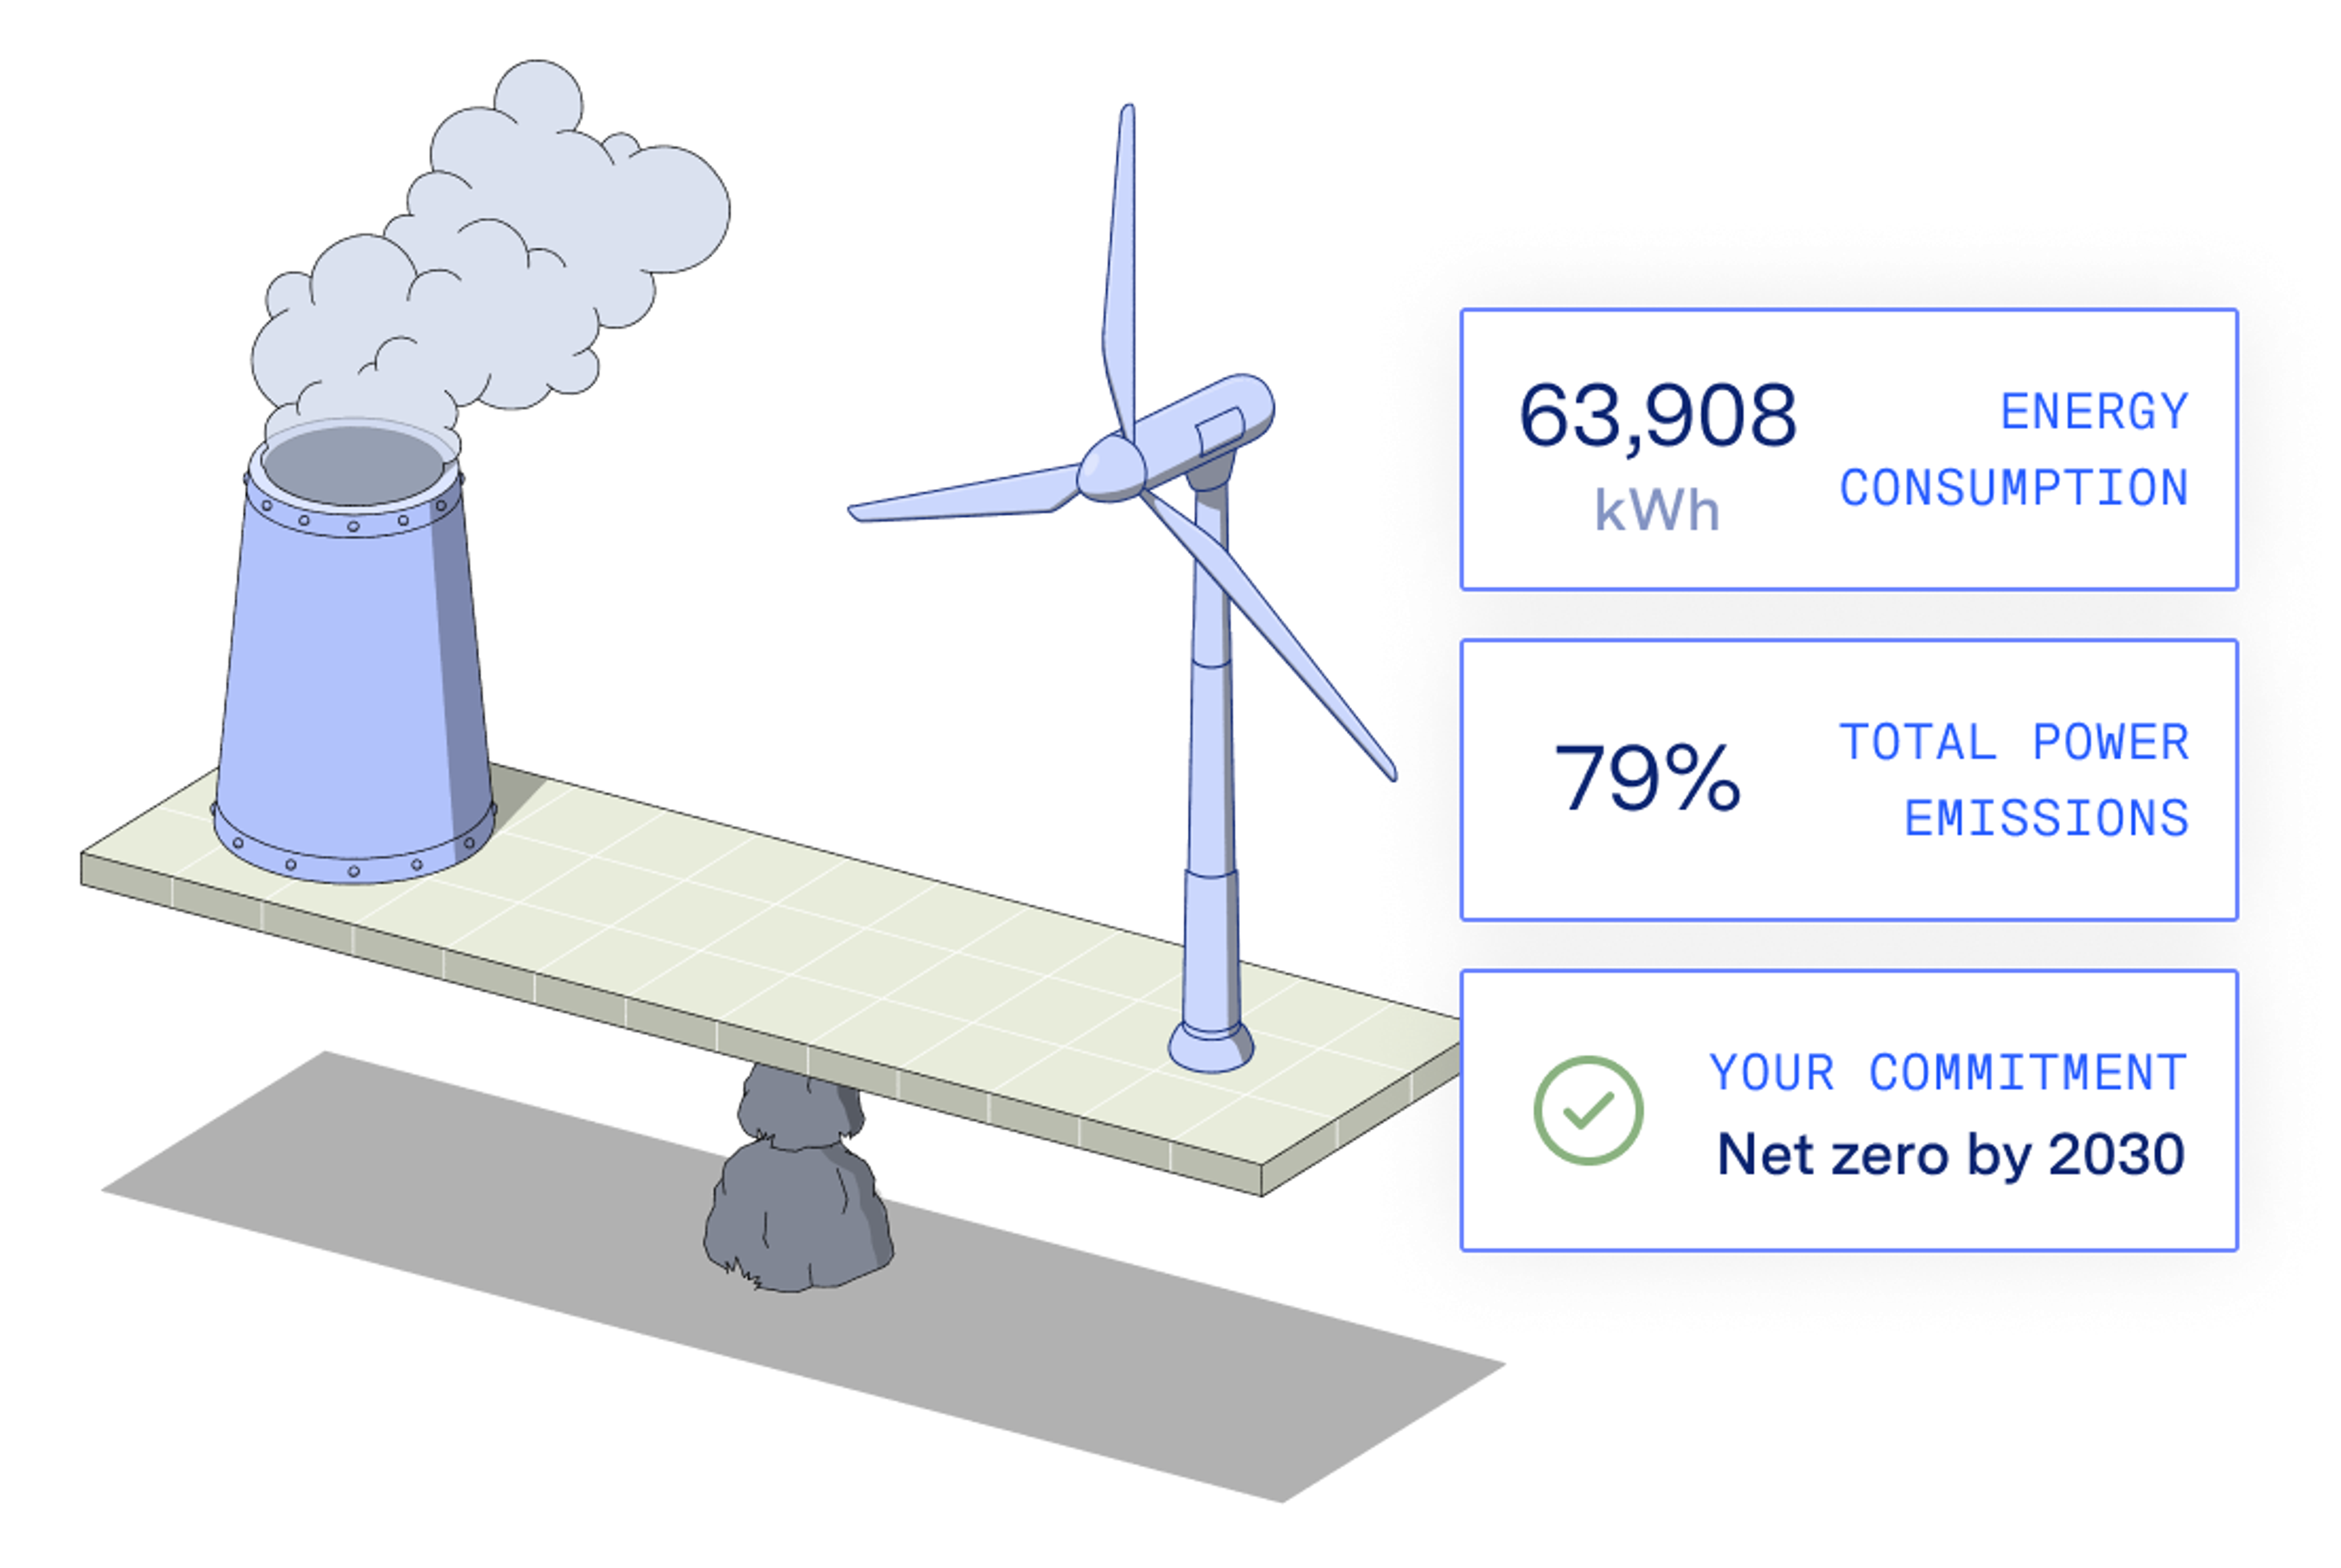 Illustration of smokestack on a balance with a wind turbine, with stats for total energy consumption, power emissions, and net zero commitment by 2030